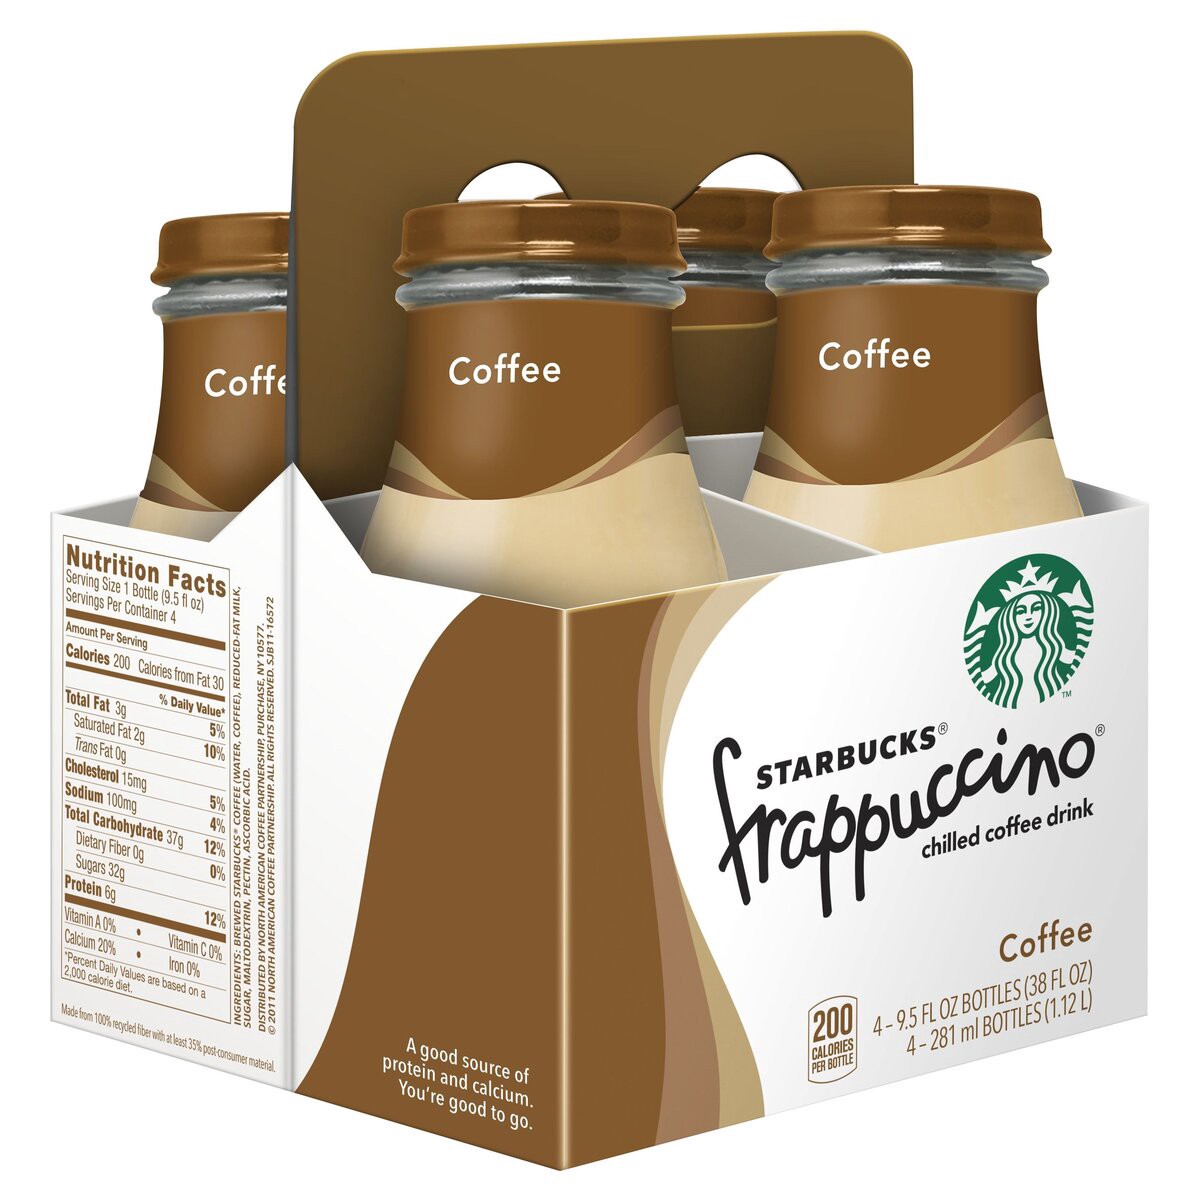 slide 4 of 9, Starbucks Frappuccino Chilled Coffee Drink Coffee 9.5 Fl Oz 4 Count Bottle, 38 oz